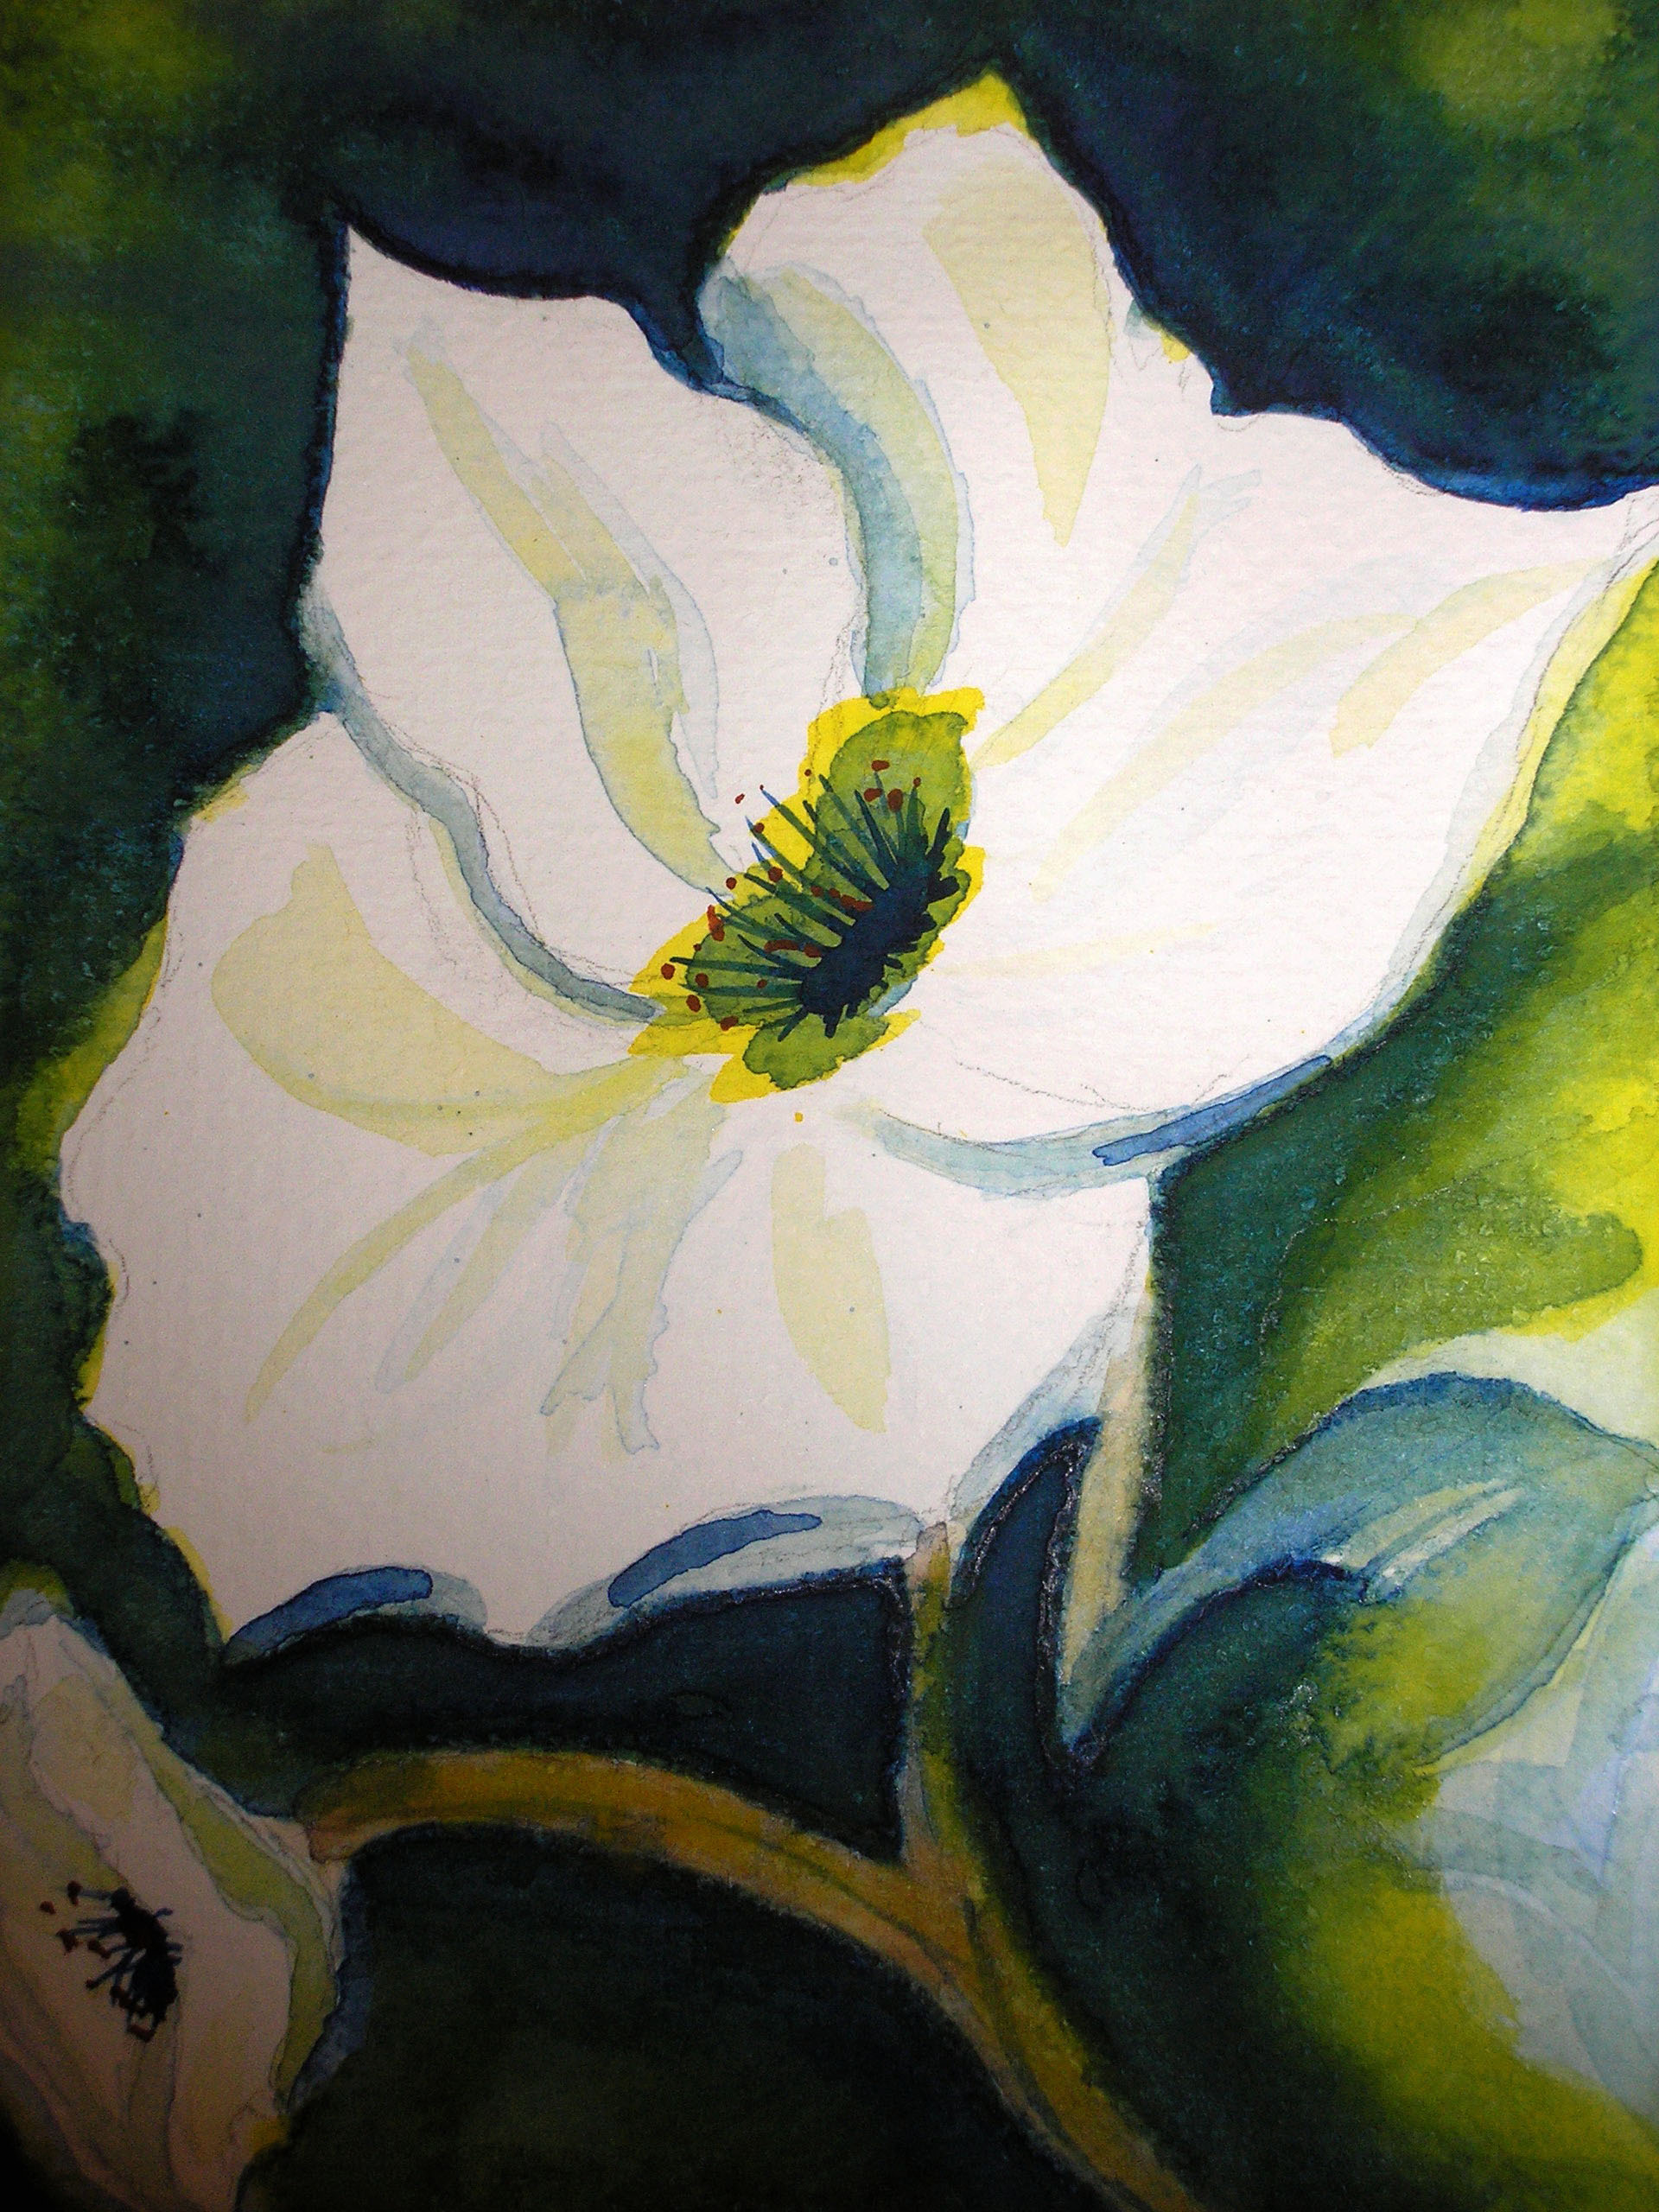    Magnolia    8 in x 10 in  watercolor on paper       